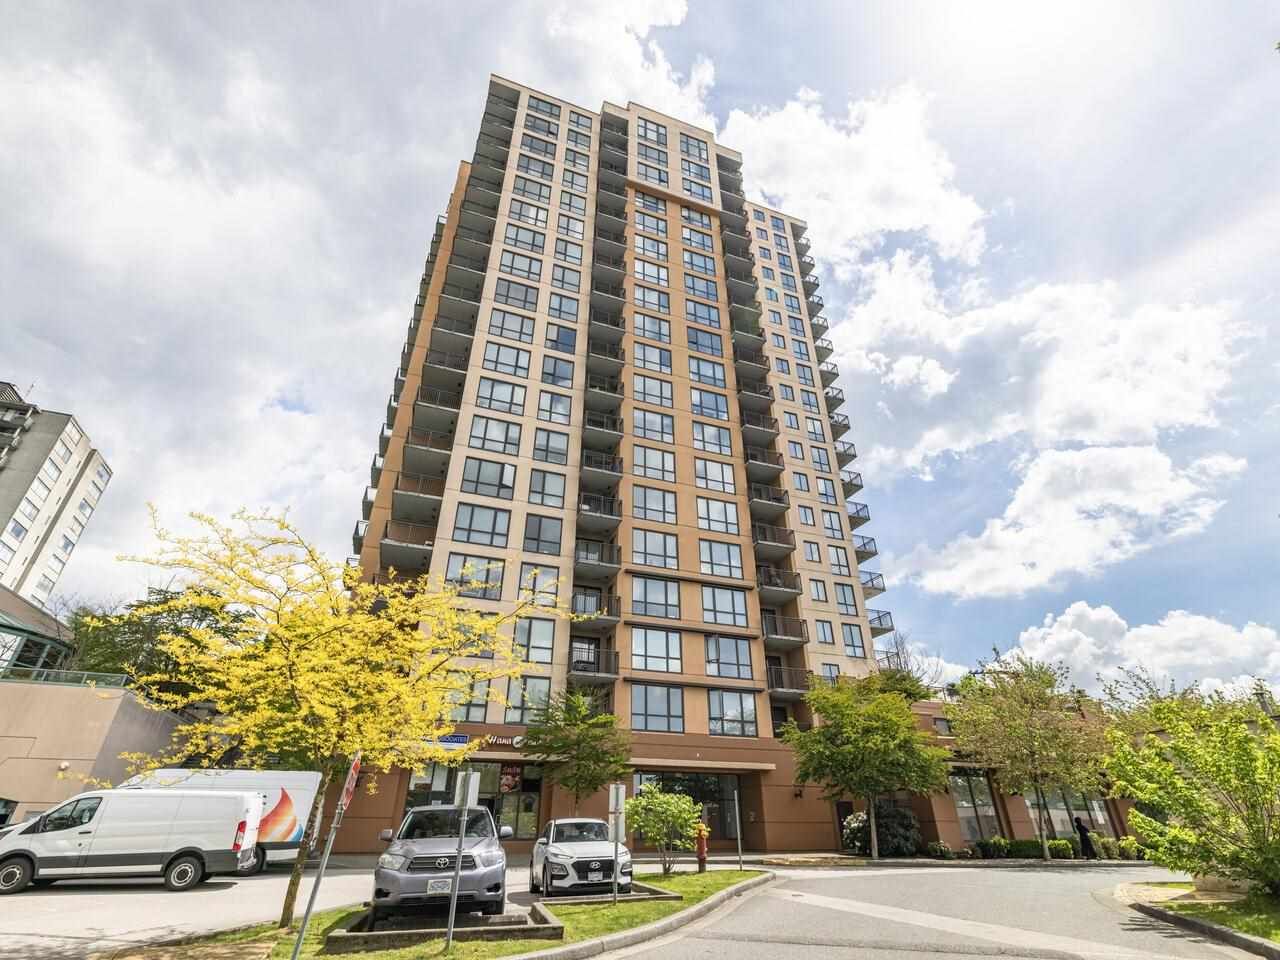 Main Photo: 1606 511 ROCHESTER AVENUE in : Coquitlam West Condo for sale : MLS®# R2579874